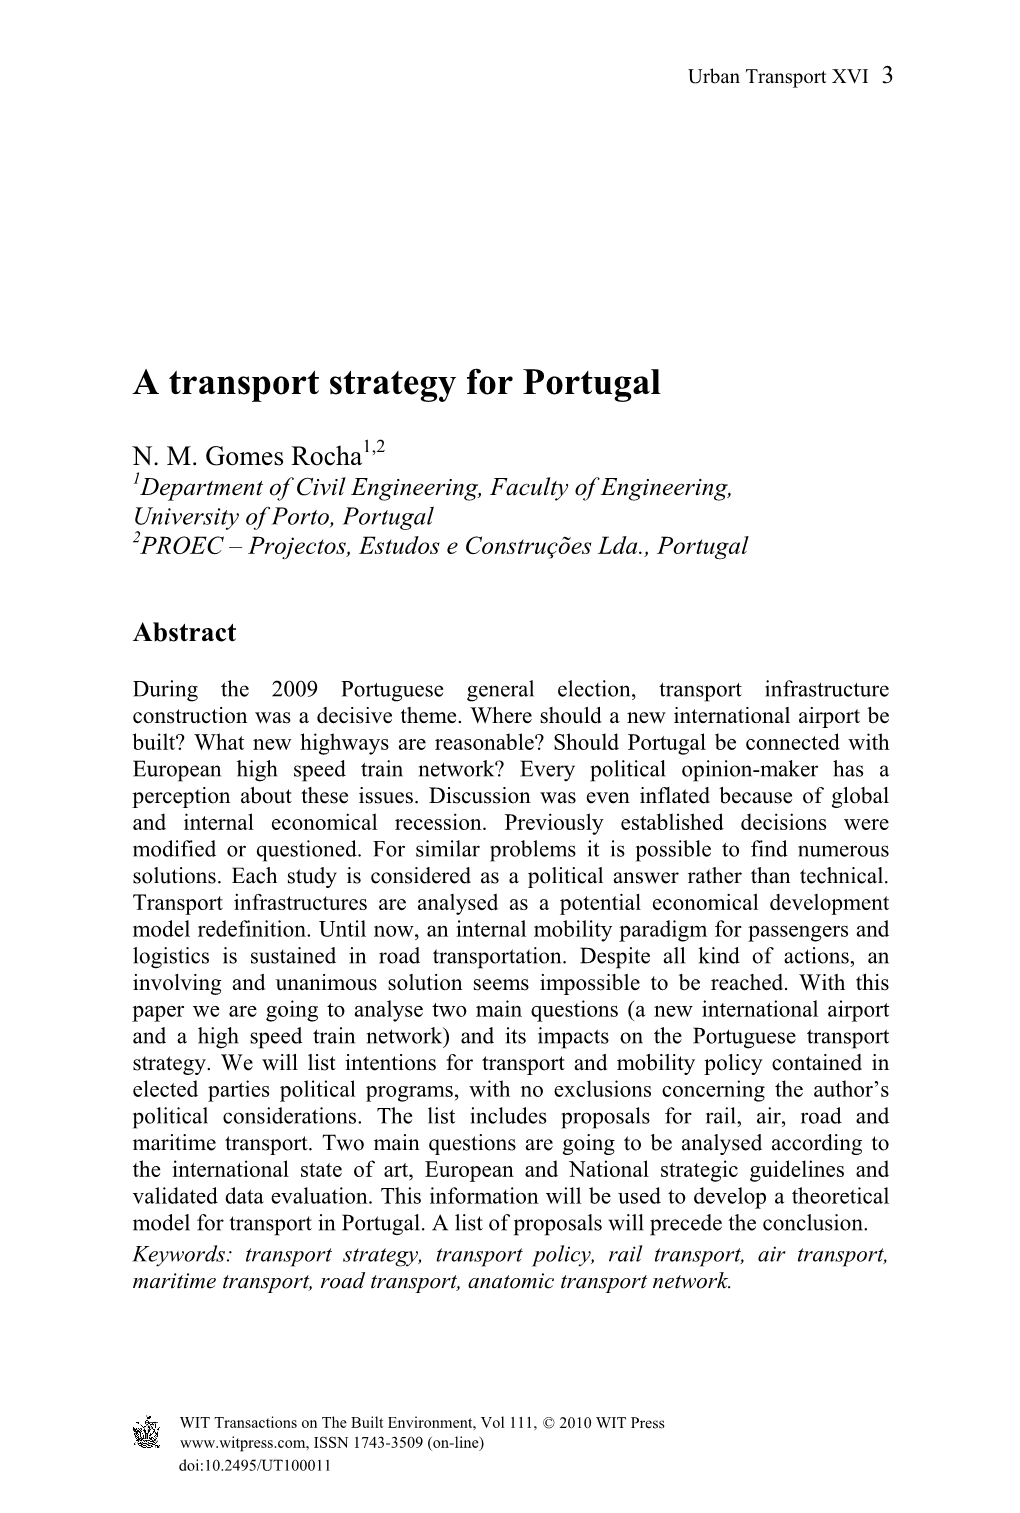 A Transport Strategy for Portugal